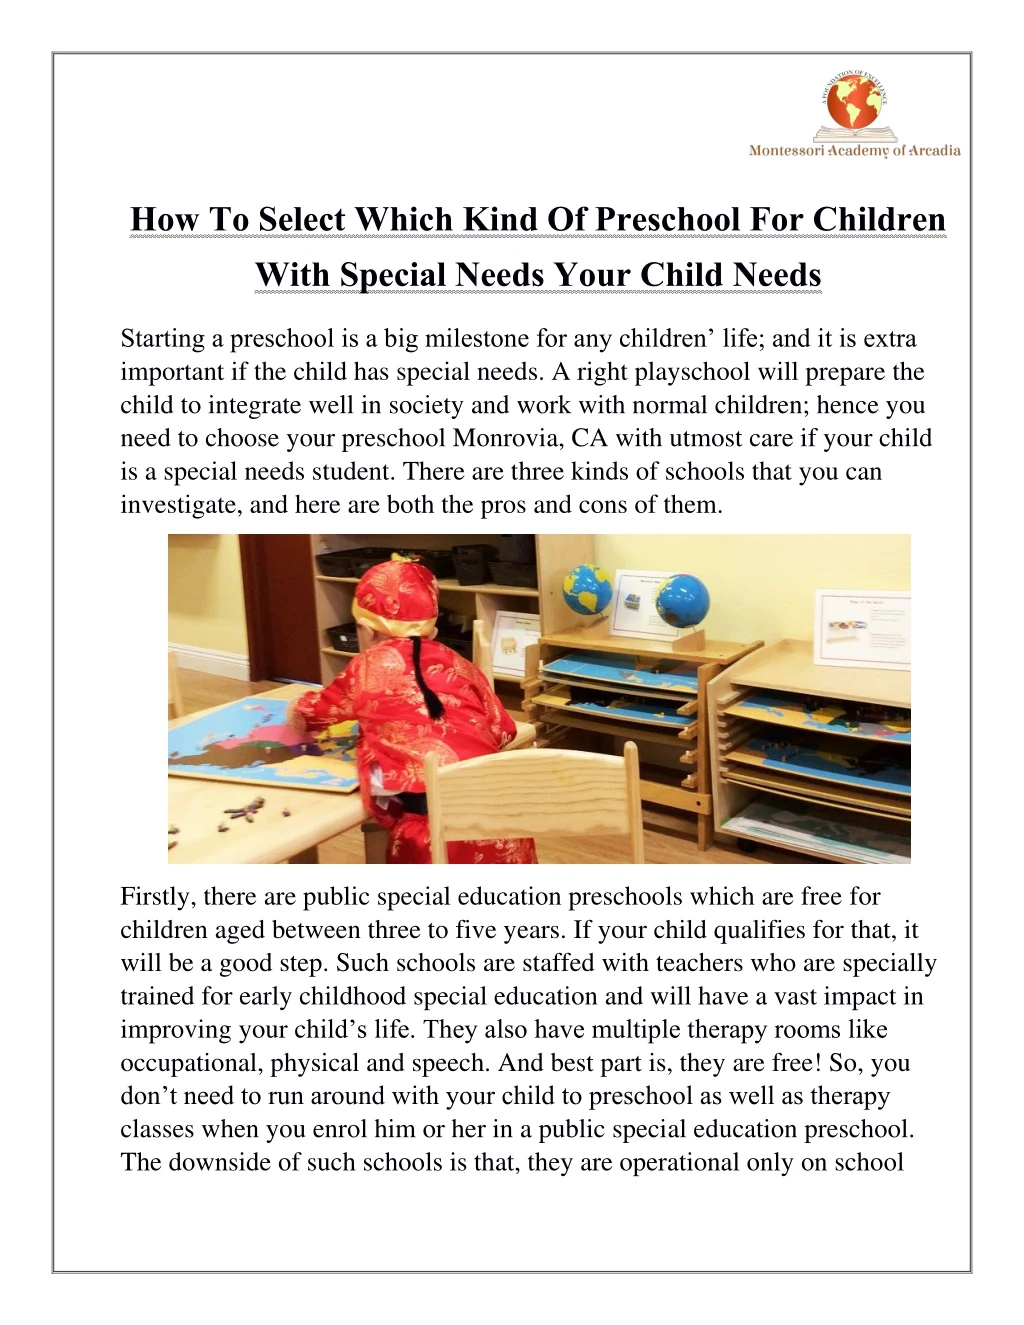 how to select which kind of preschool